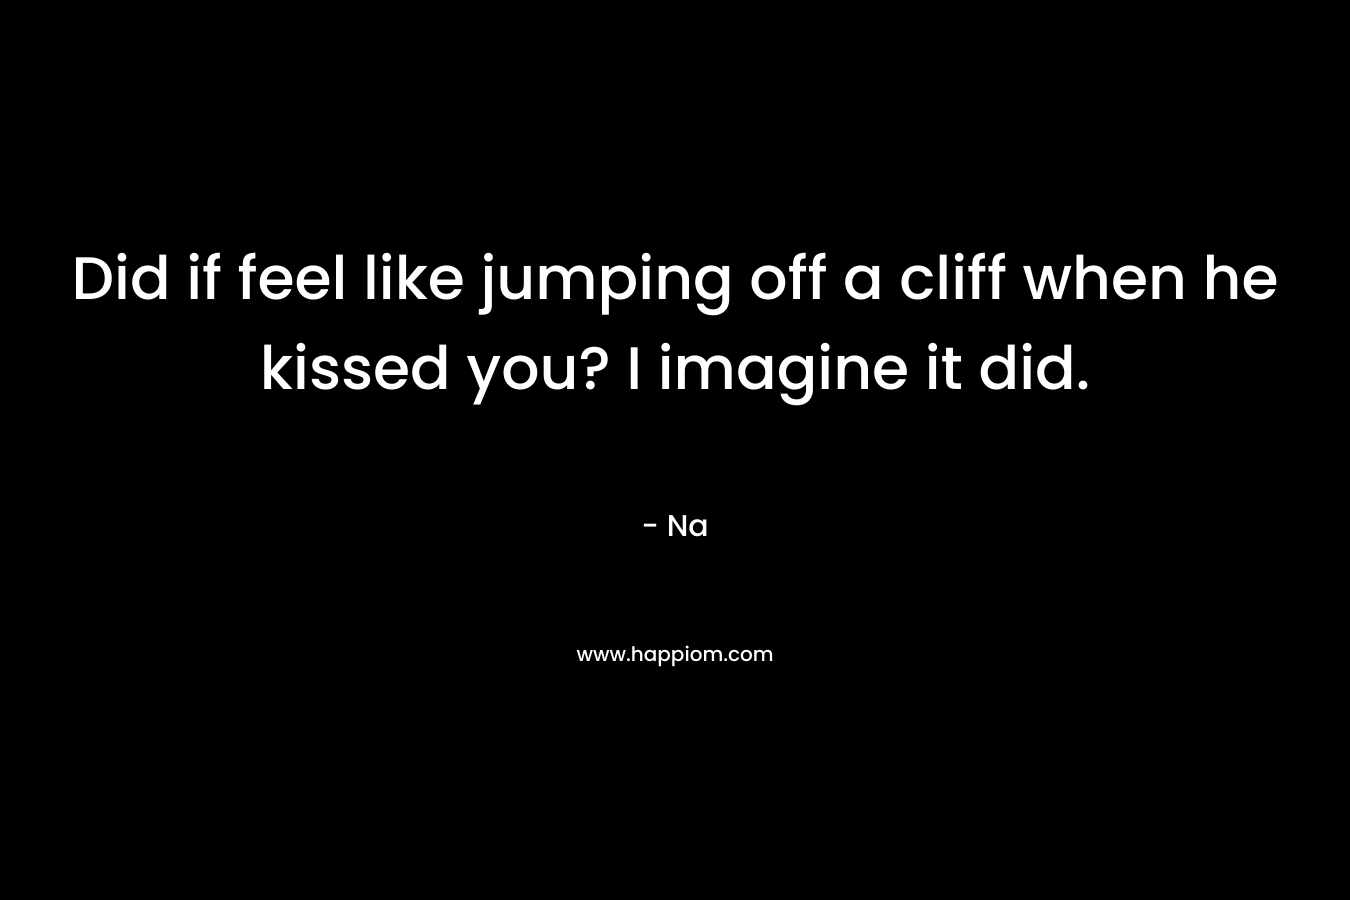 Did if feel like jumping off a cliff when he kissed you? I imagine it did. – Na